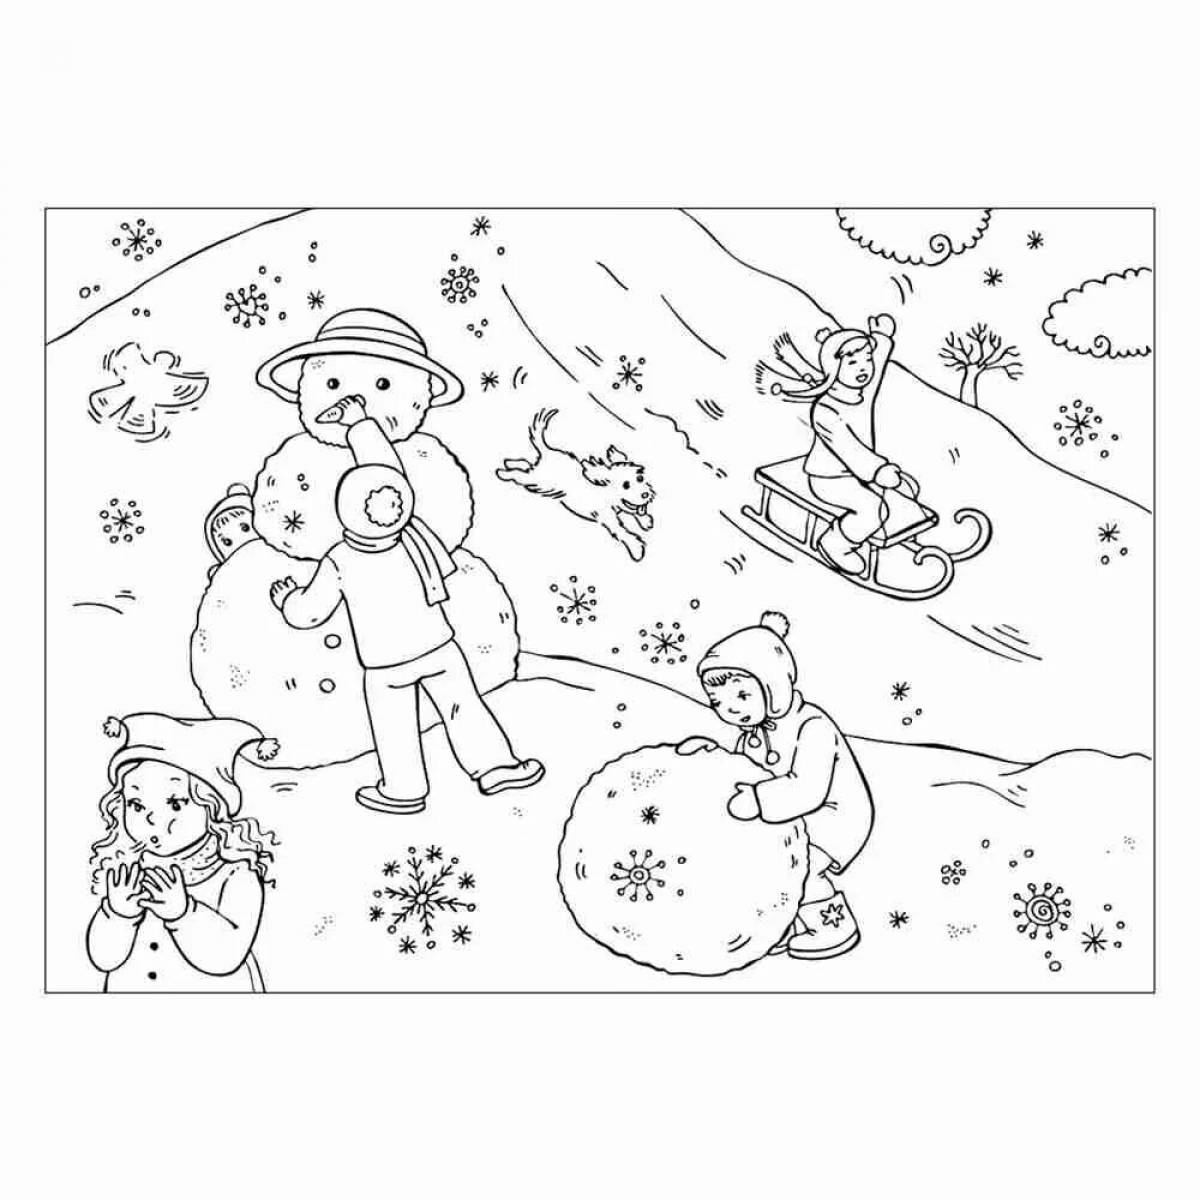 Winter games for kids #6